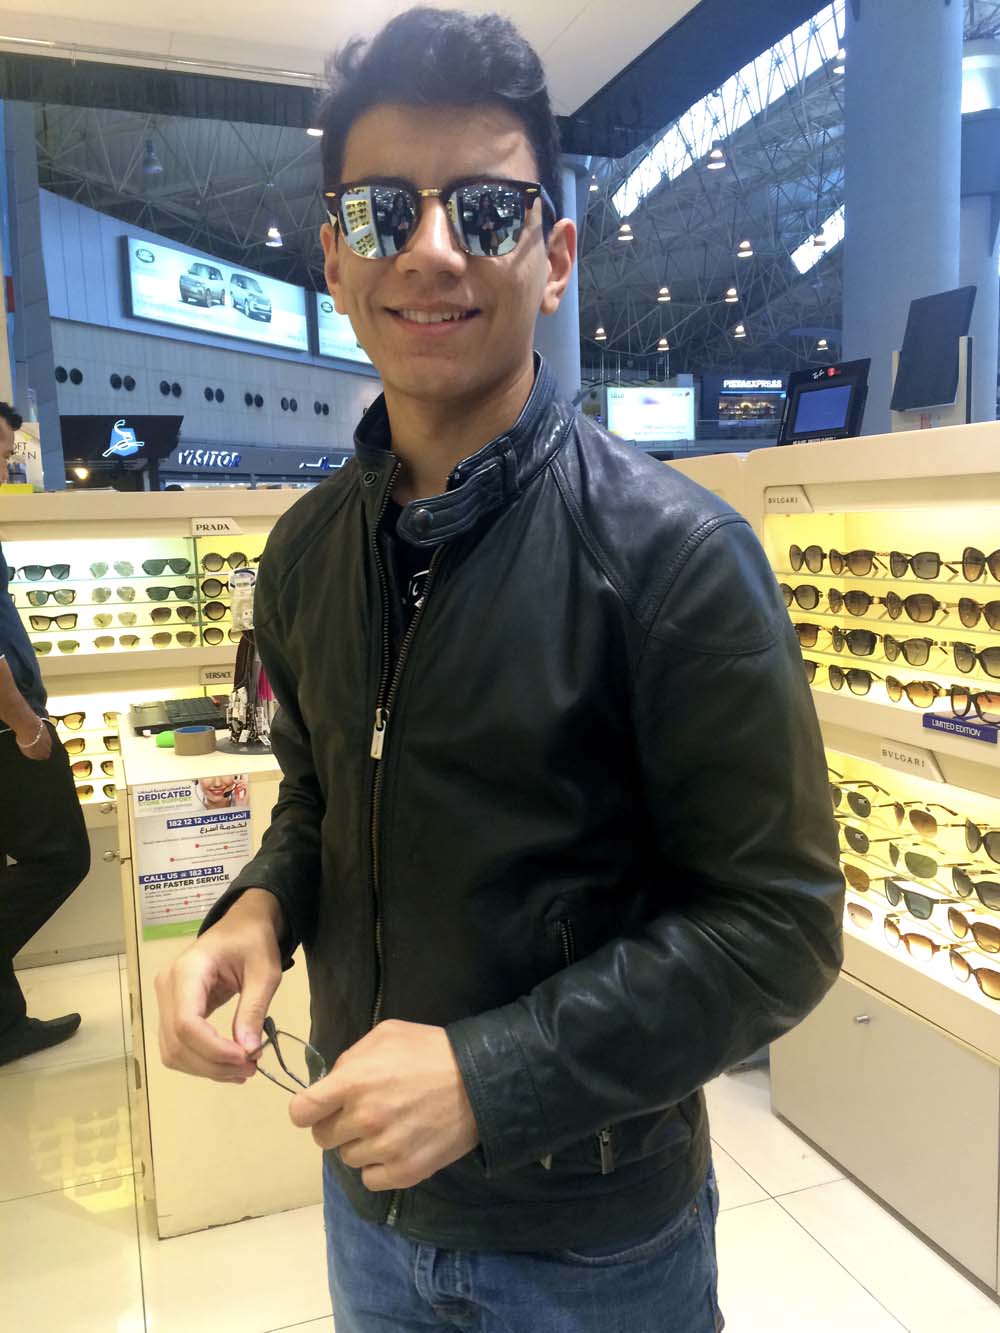 i was dropped off at the airport by my nephew tarek and my son yousef. it's so nice when roles are reversed and you feel like the little ones are now taking care of you. here yousef tries on a pair of aviators. joe cool